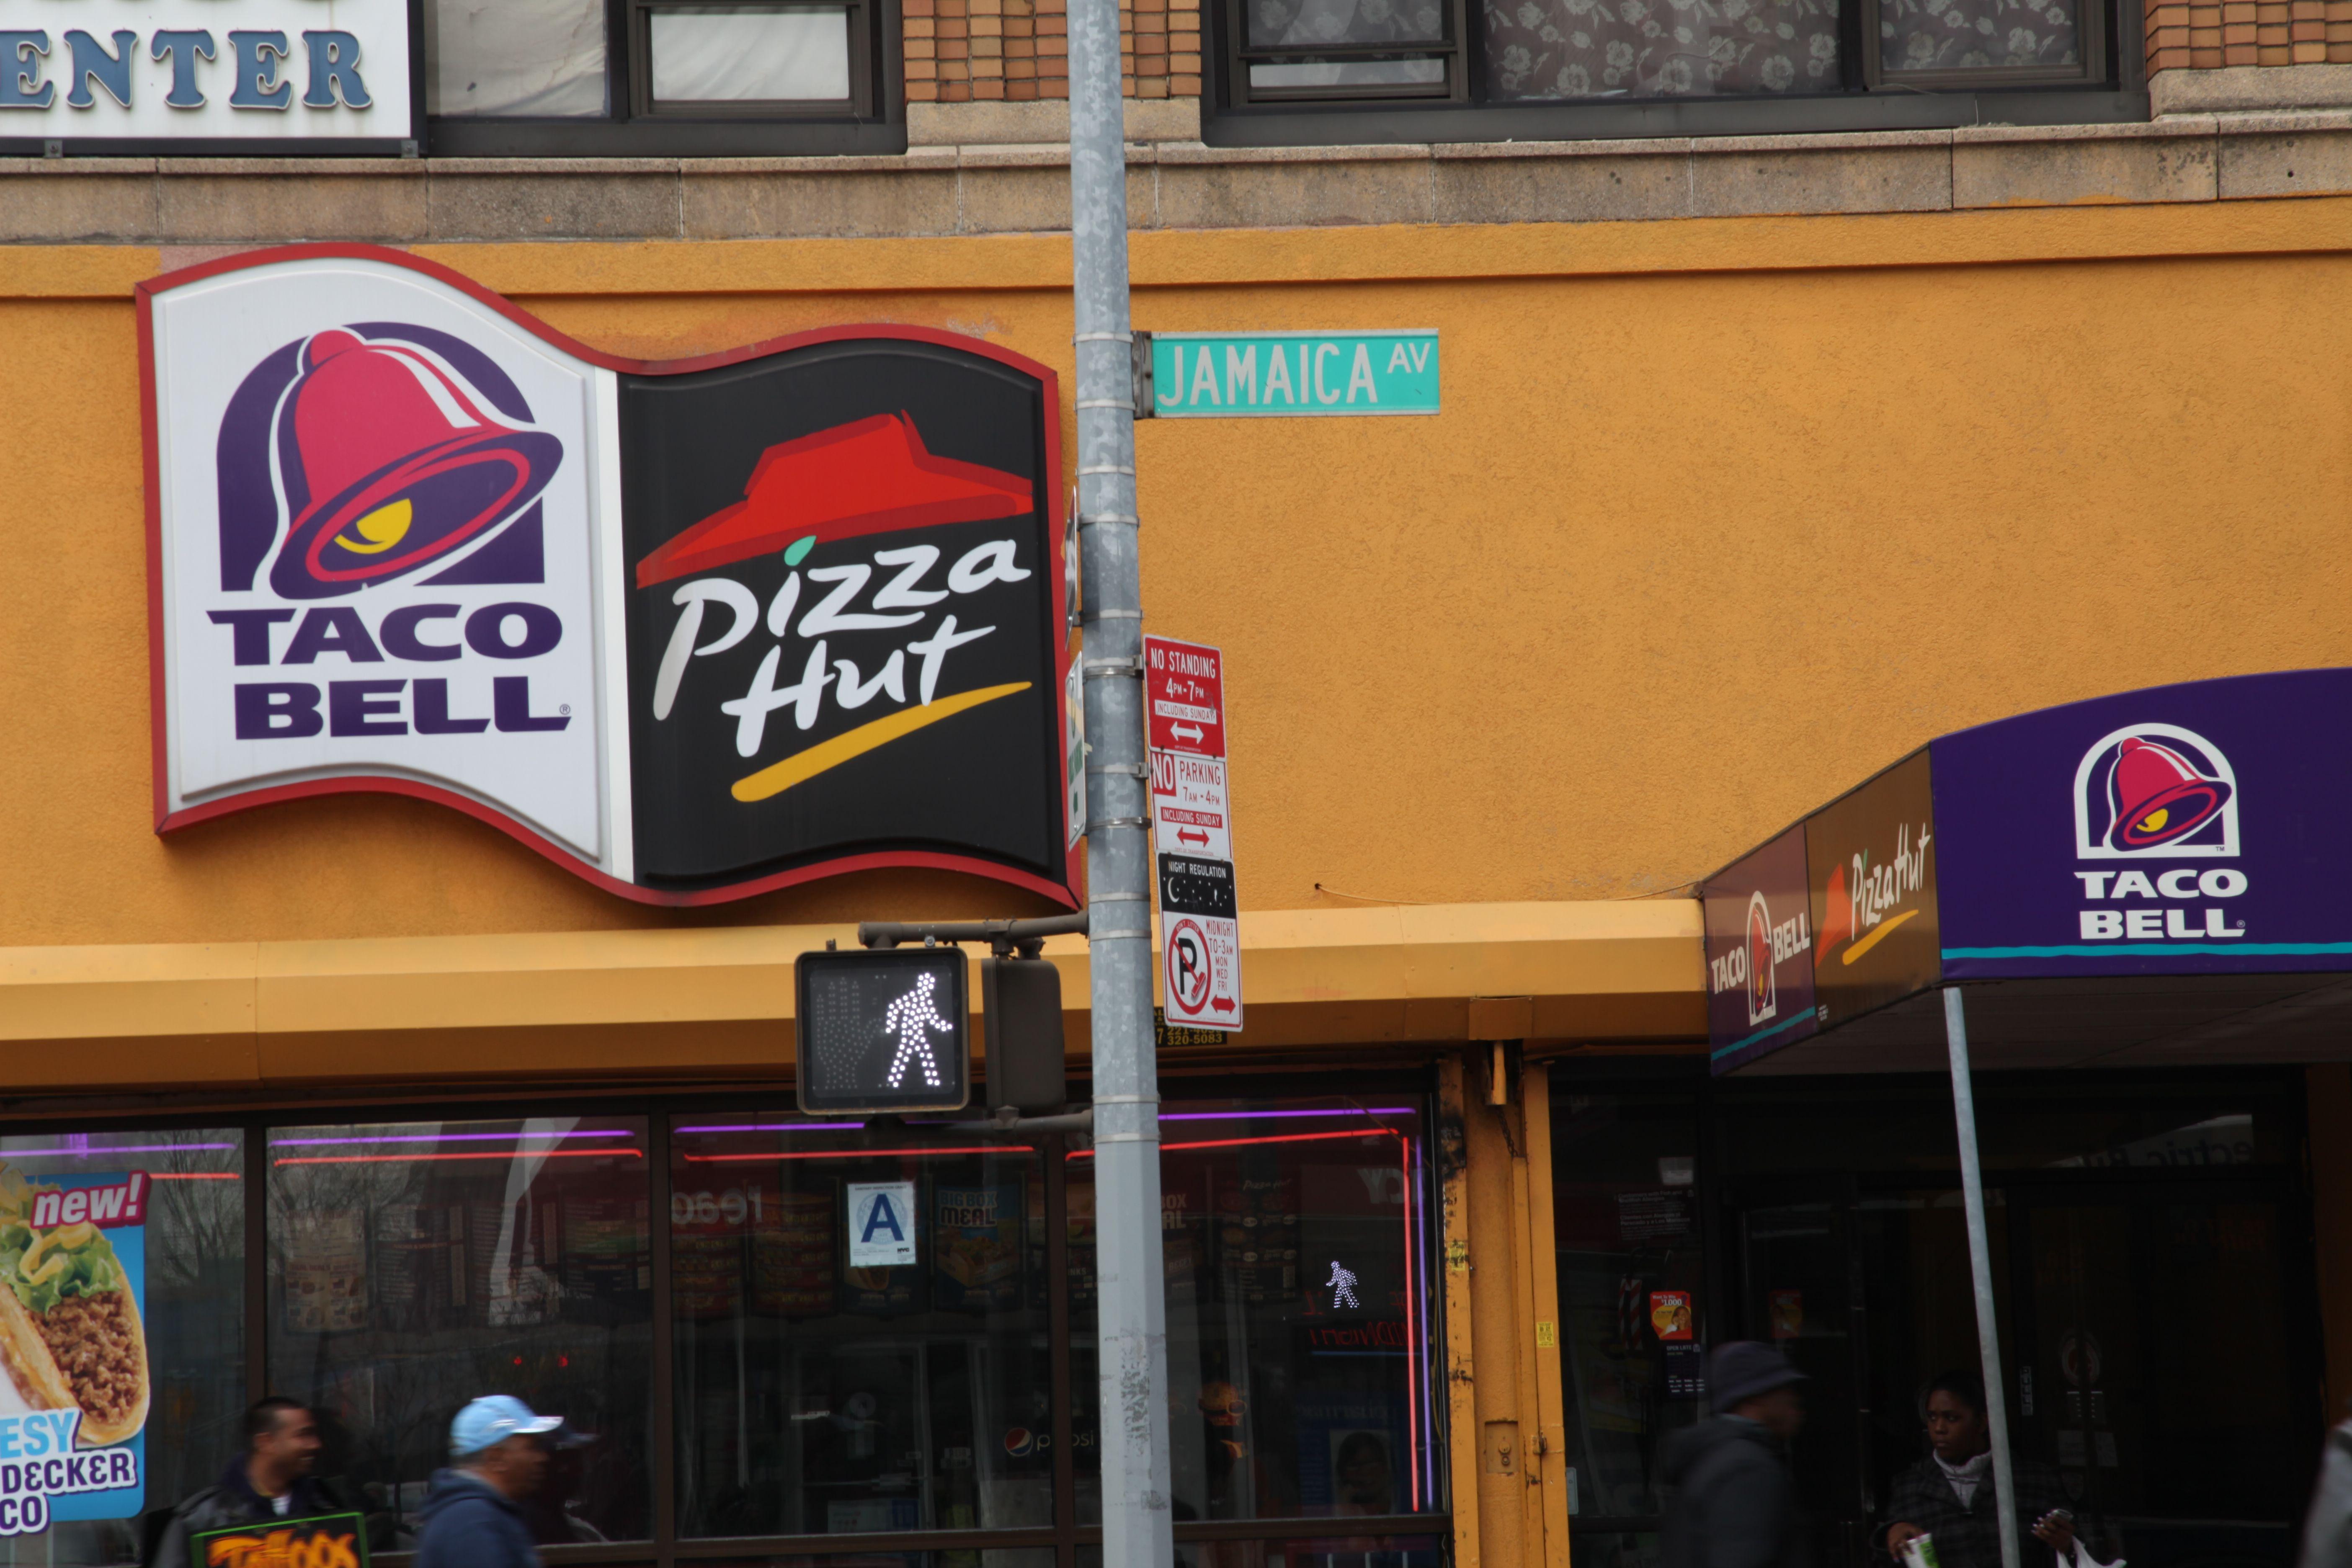 Pizza Hut Taco Bell Logo - Jamaica Avenue: Eat at the Combination Pizza Hut & Taco Bell